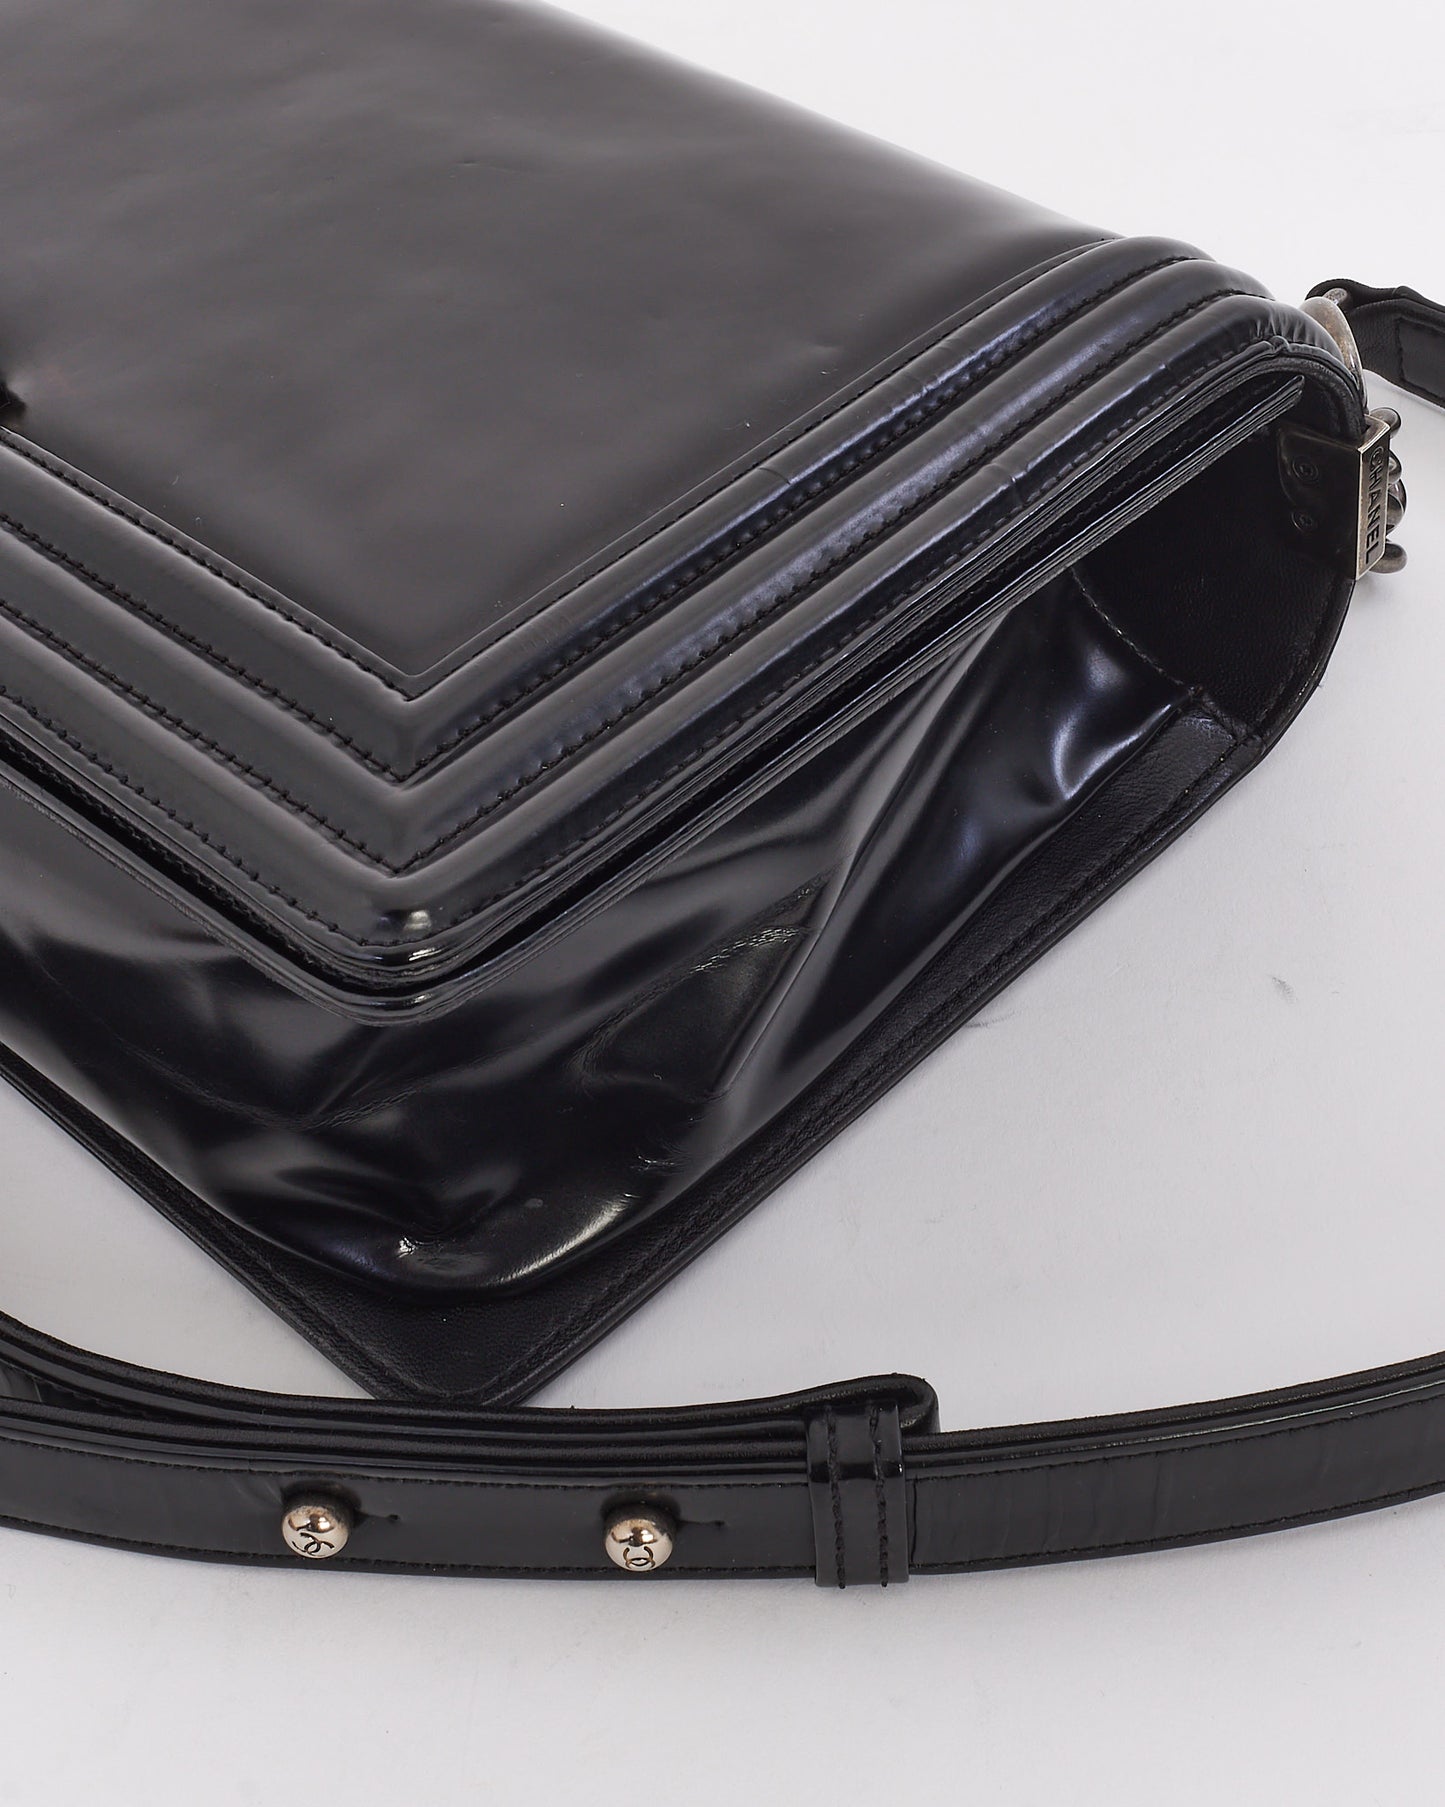 Chanel Black Smooth Glossy Leather Large Boy Bag